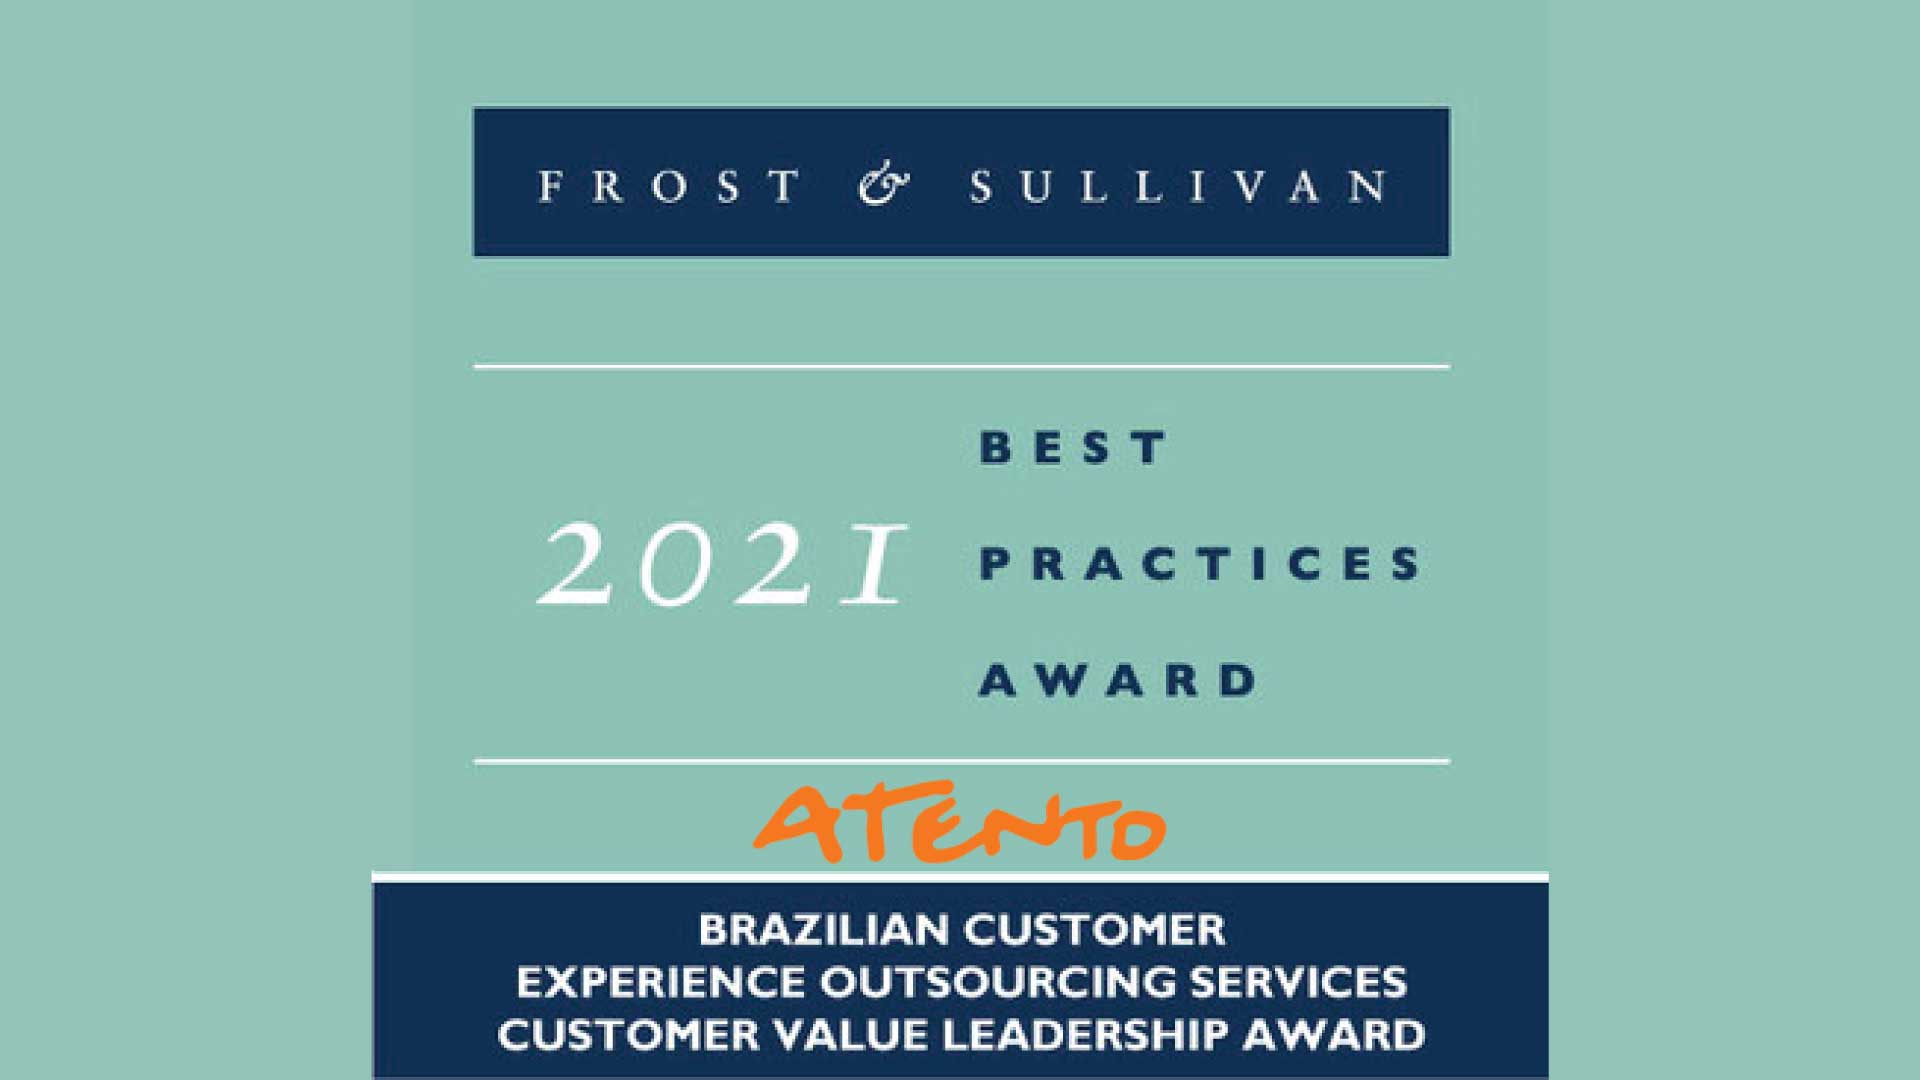 Frost & Sullivan Recognizes Atento for Leading the Customer Experience (CX) Outsourcing Services Industry in Brazil with Trendsetting Solutions